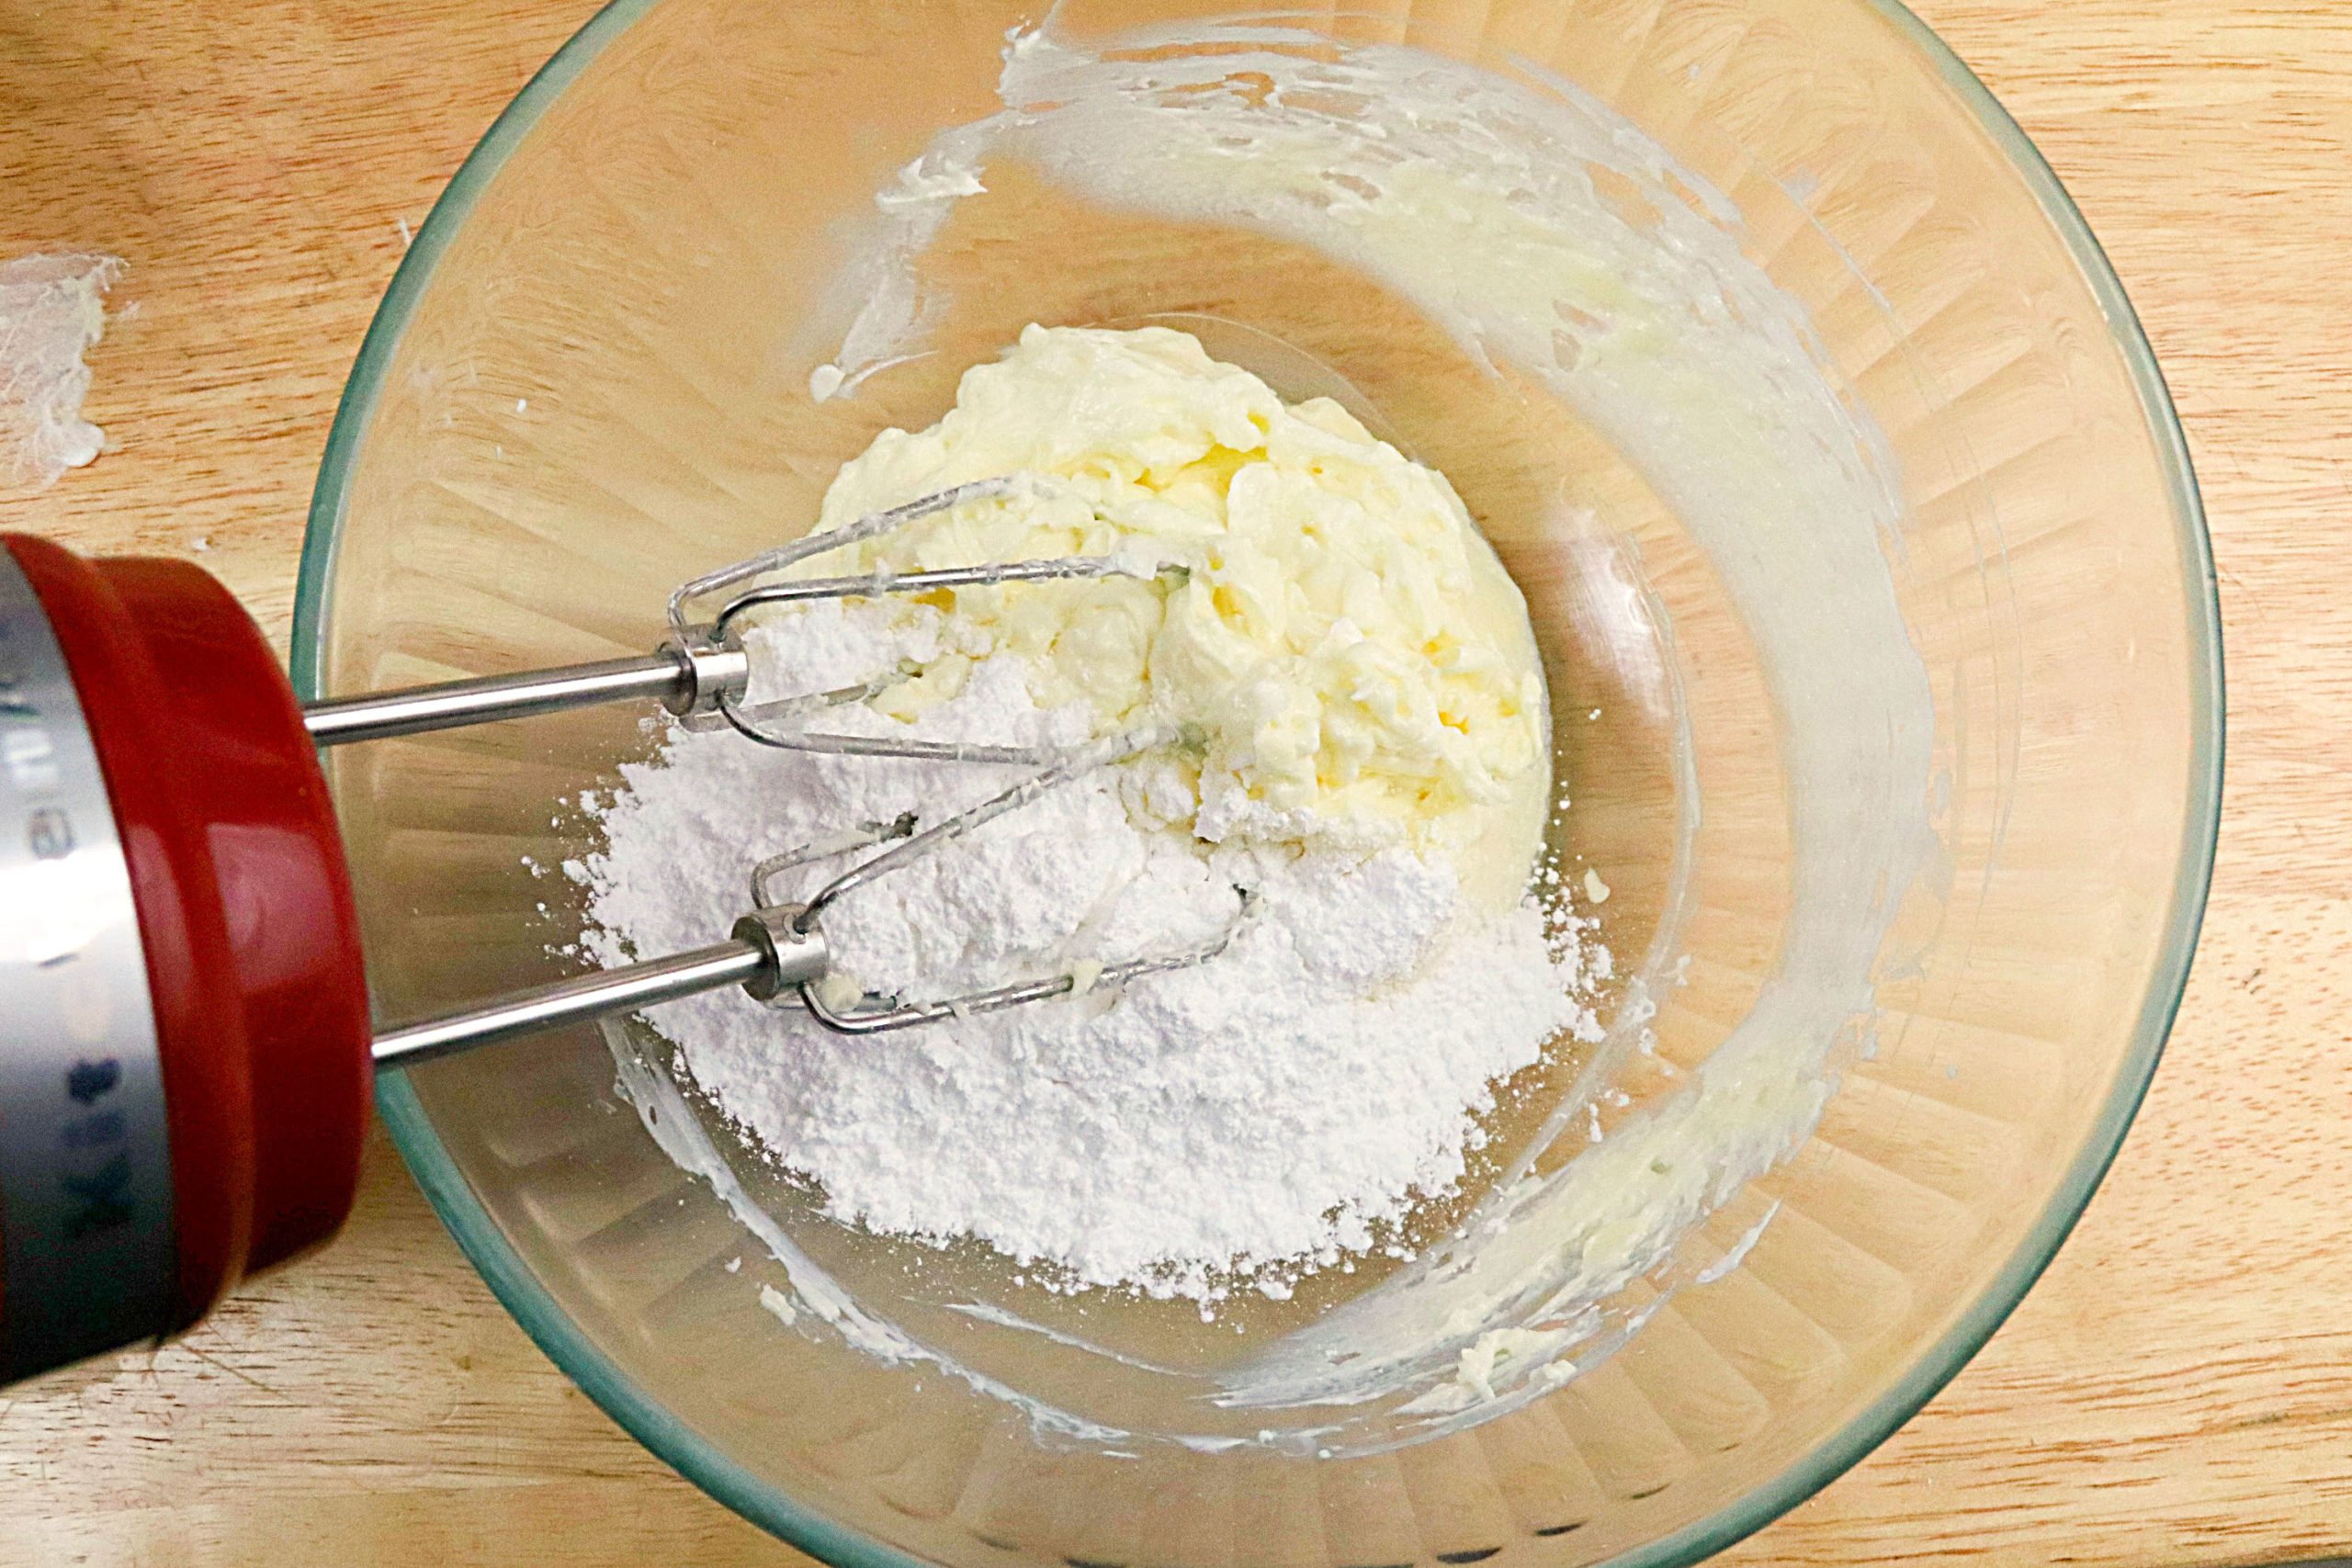 Mixing the butter, cream cheese and icing sugar to a bowl to make the icing.